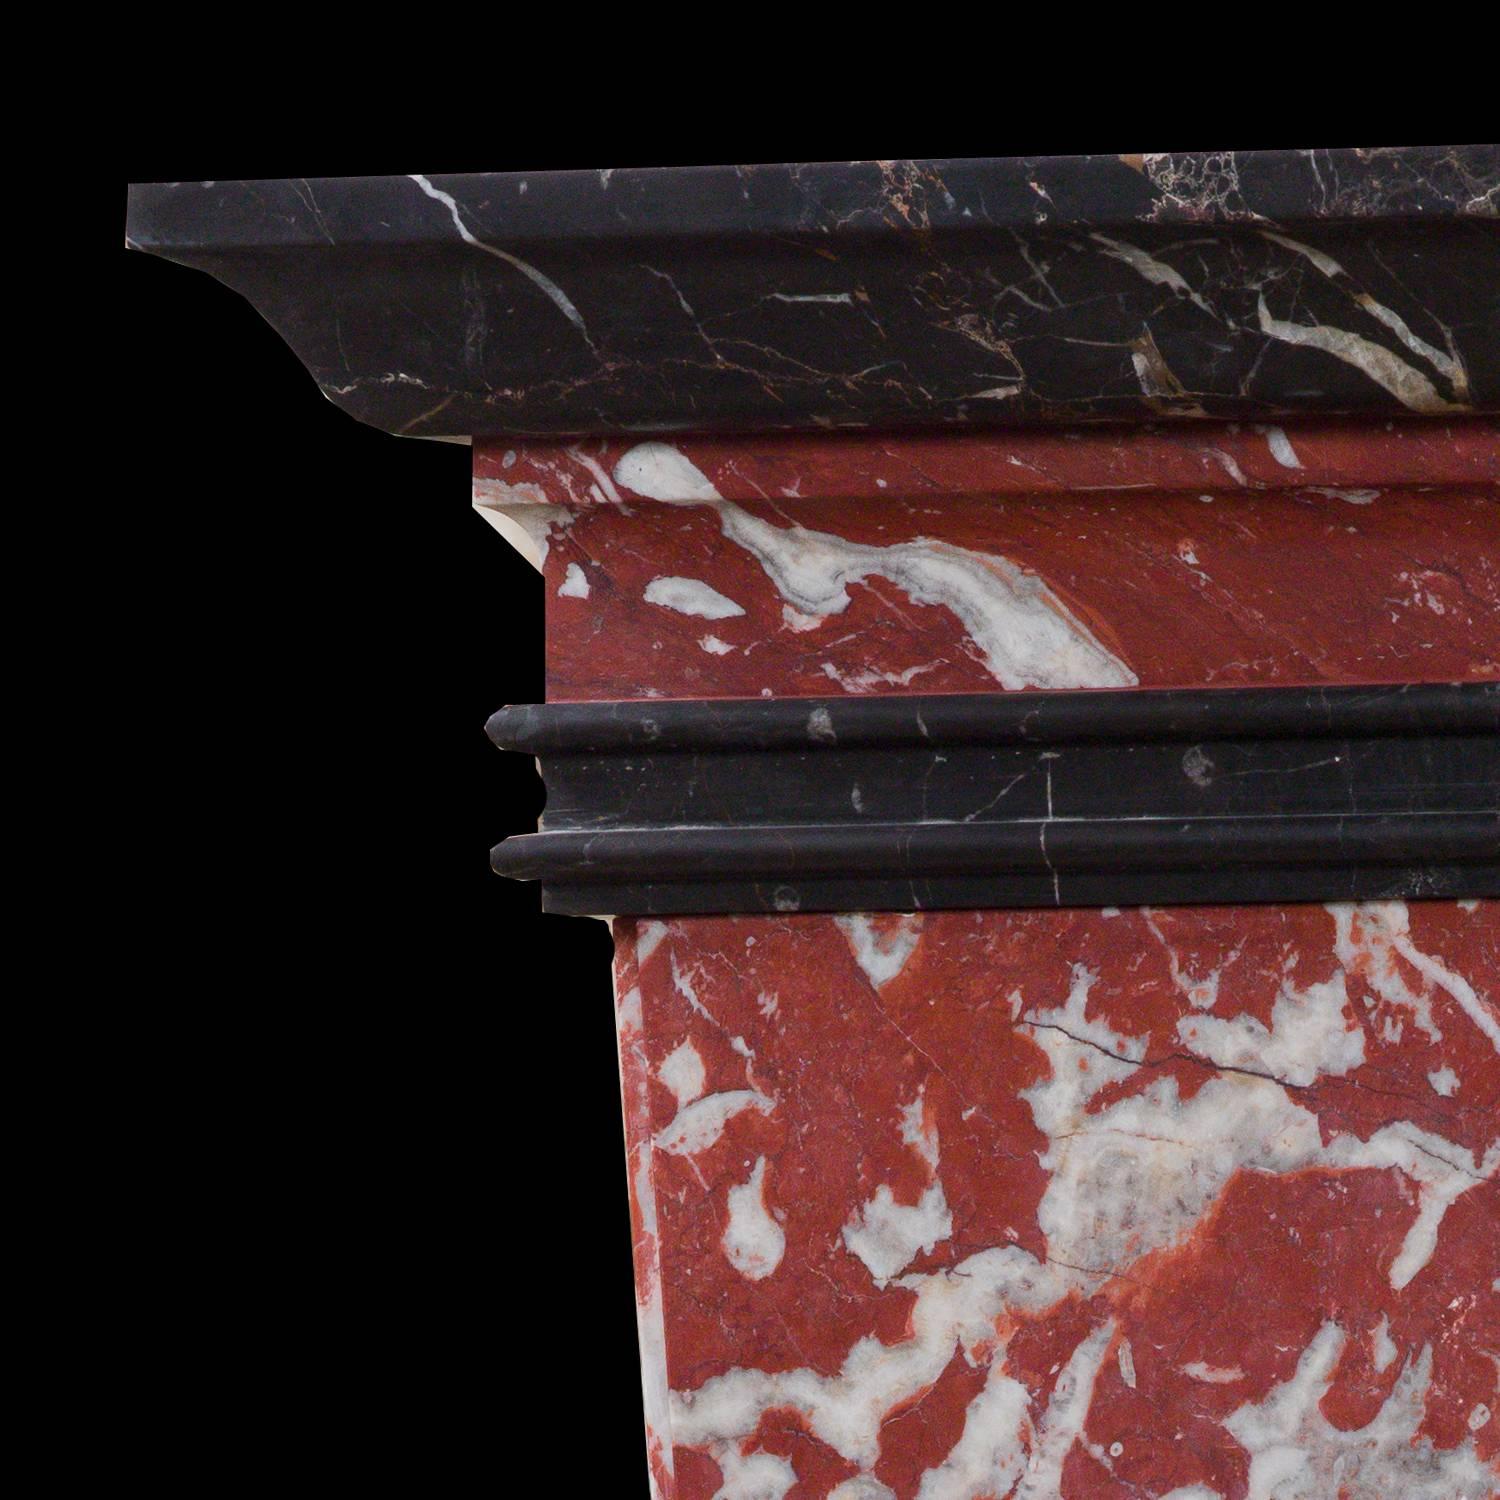 Superb pair of Herma pedestals, made in very precious French marbles: Red Languedoc and Noir St Laurent. This fancy and elegant marble were used in very high level decoration and in Europe in the most exclusive palaces and castles. Principally used